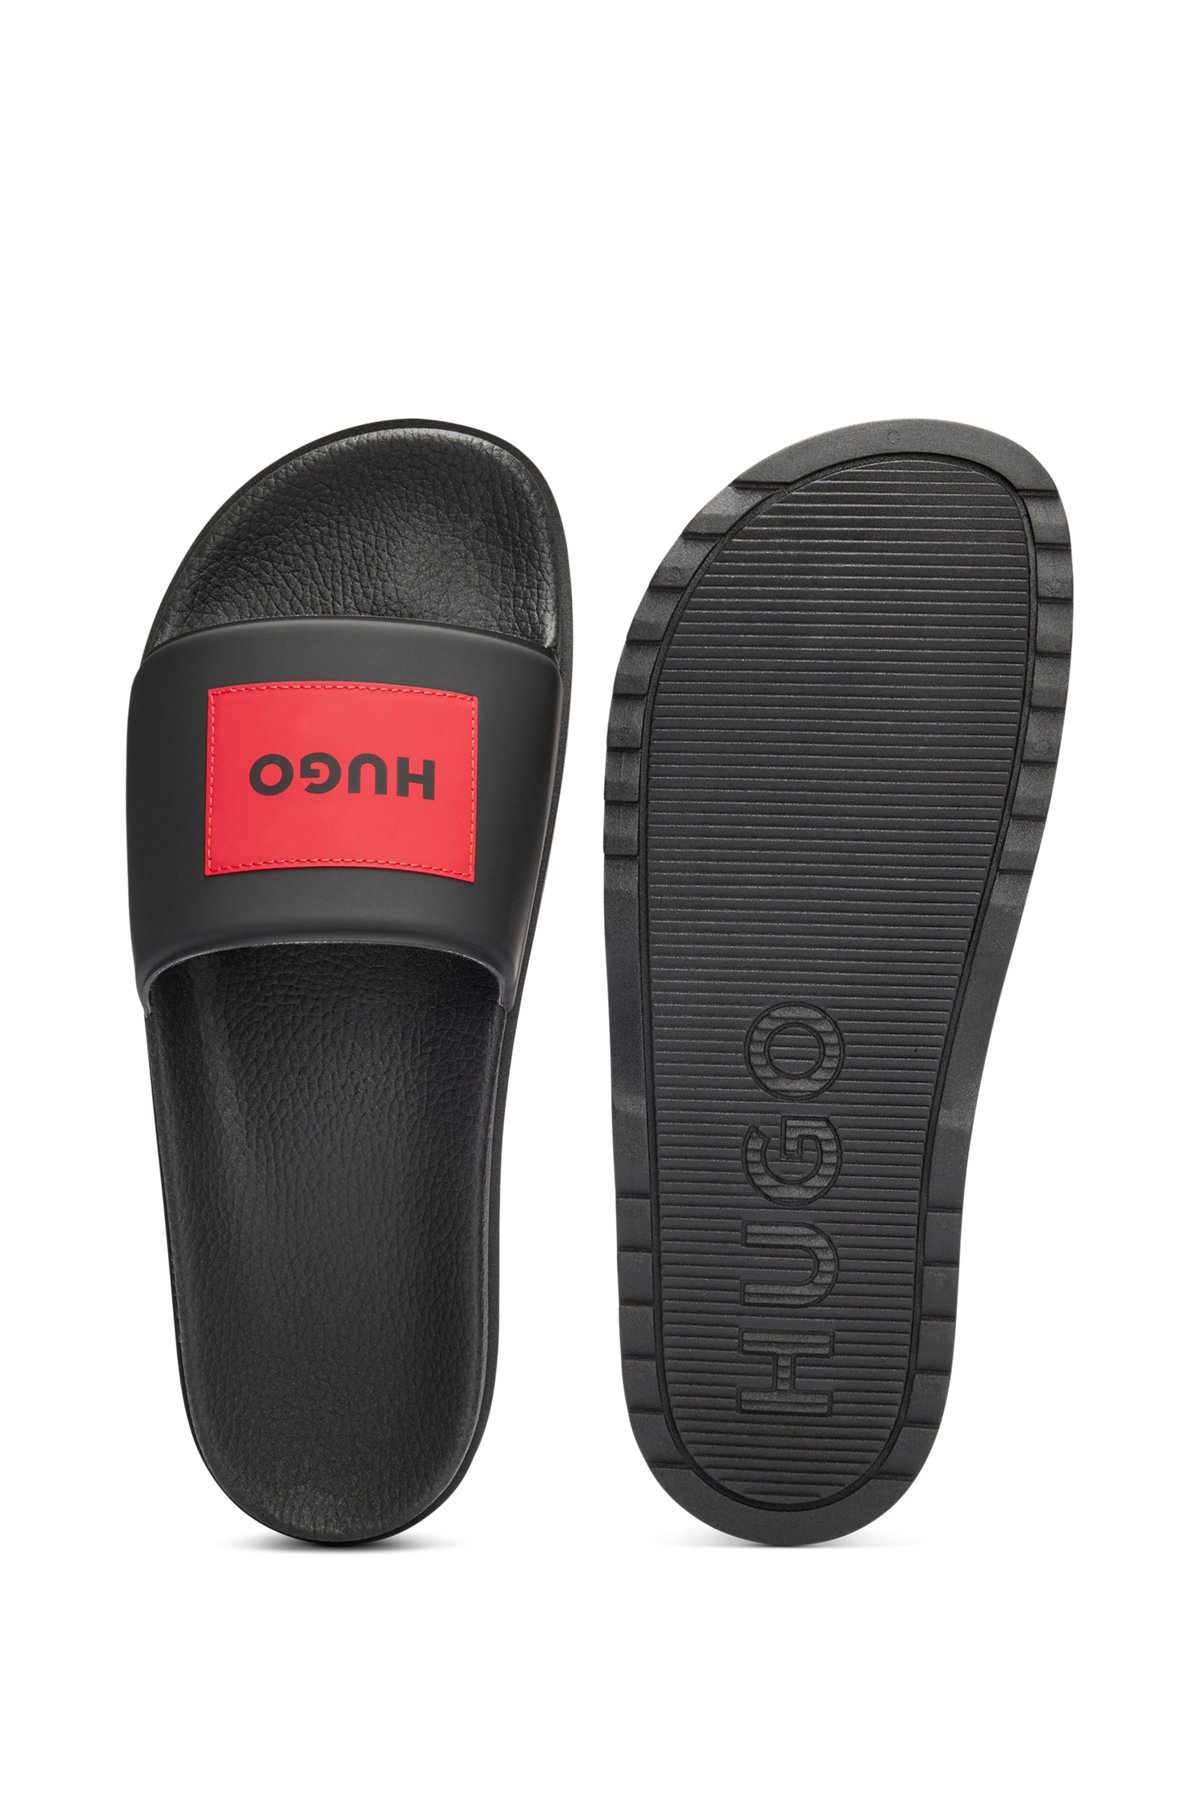 Italian-made slides with red logo patch, Black